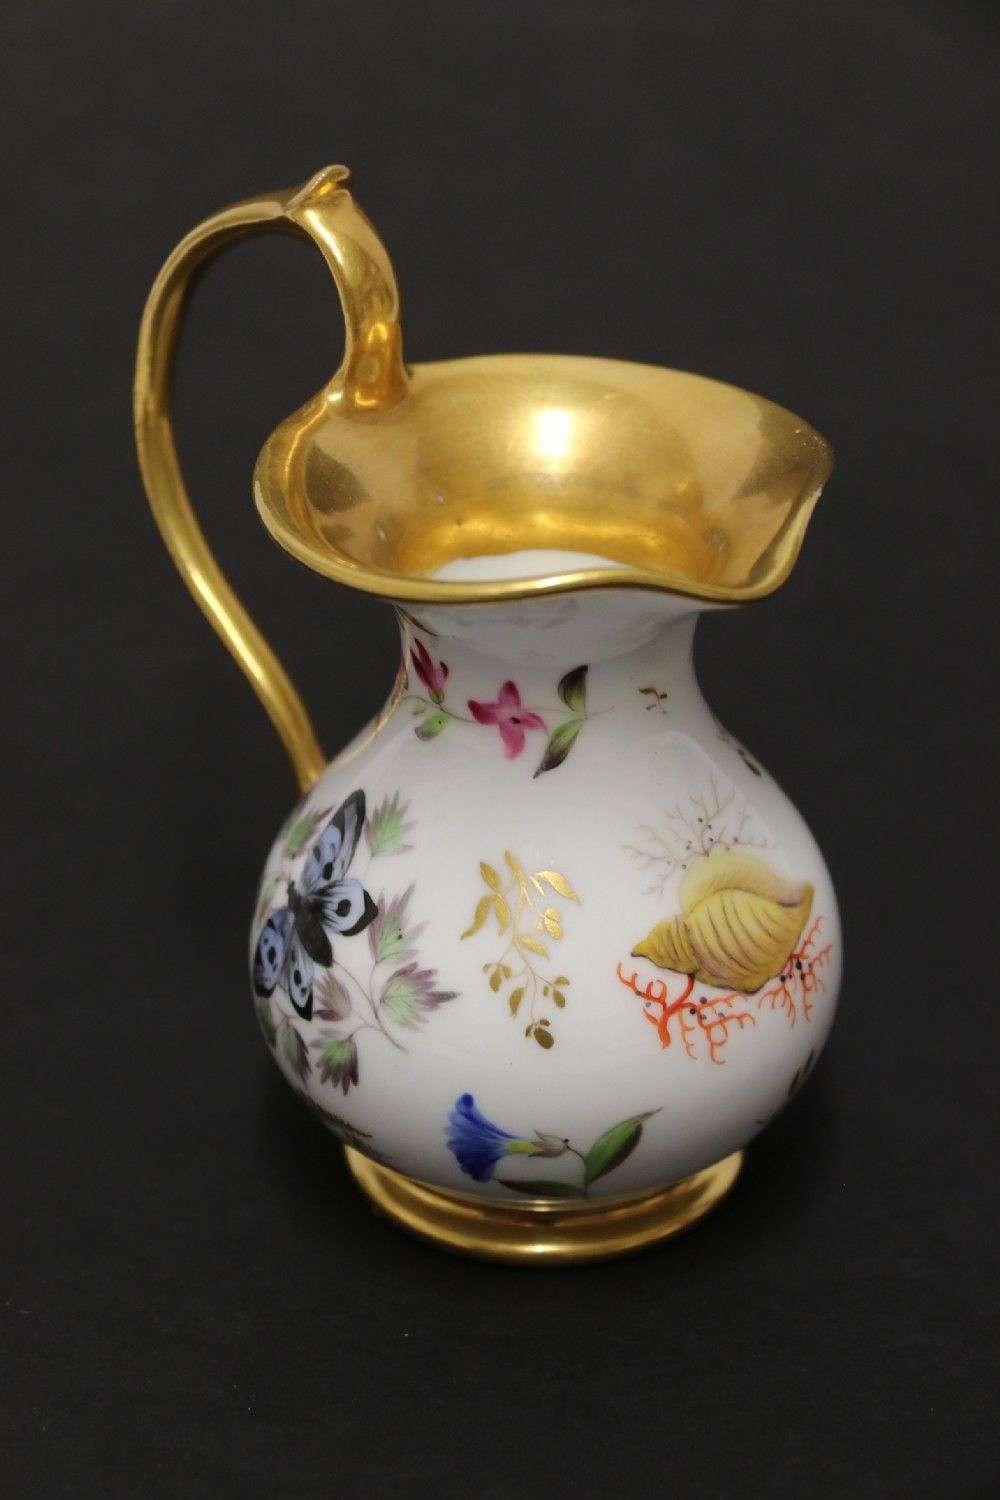 A Fine Quality Early 19th Century French Porcelain Miniature Ewer